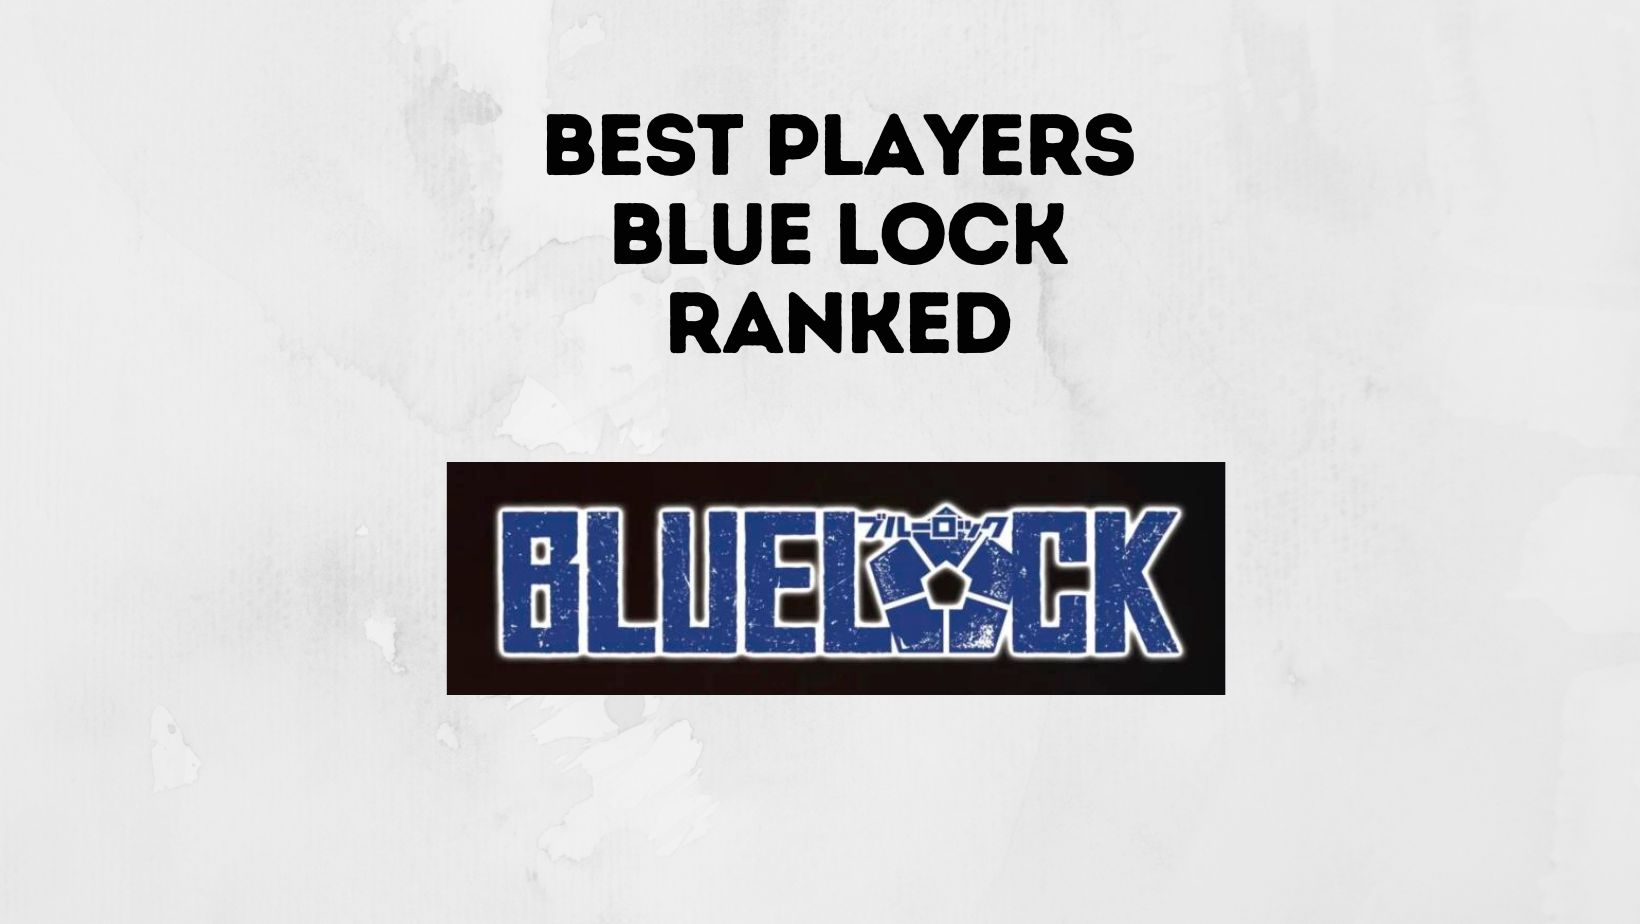 Best Players Blue Lock Ranked